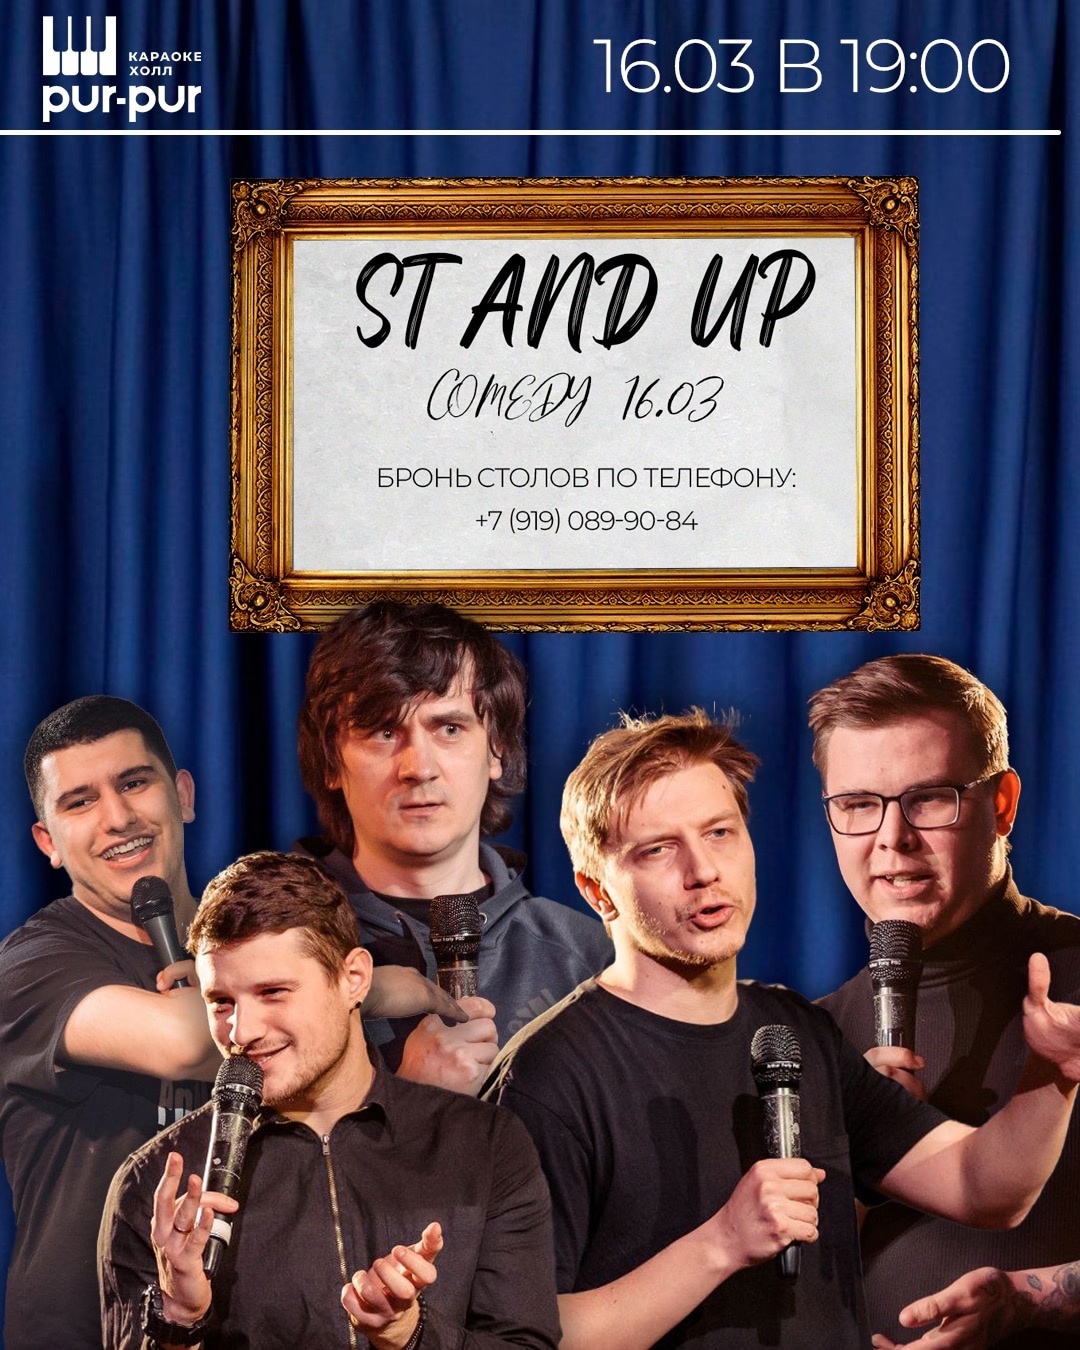 Афиша - PUR-PUR STAND UP